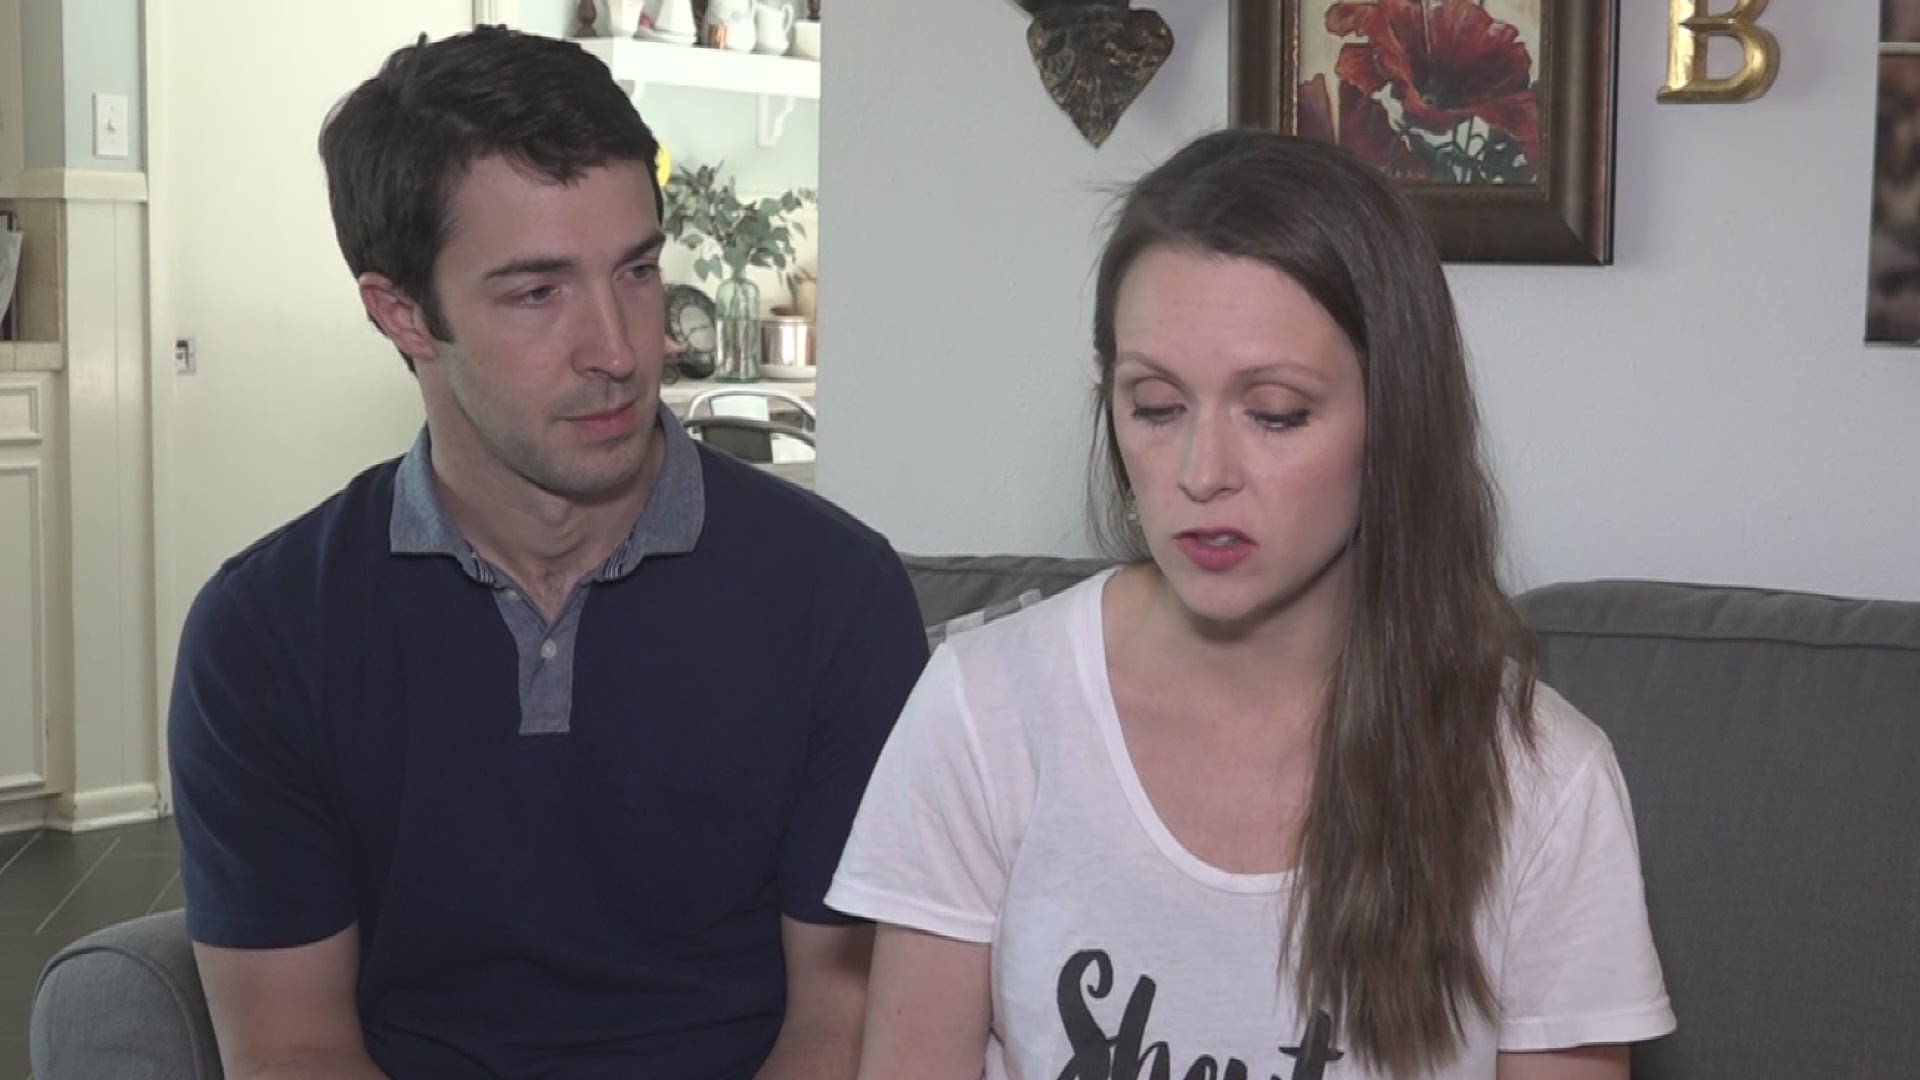 Full Interview with the Persings family; speaking about their daughter with Down Syndrome